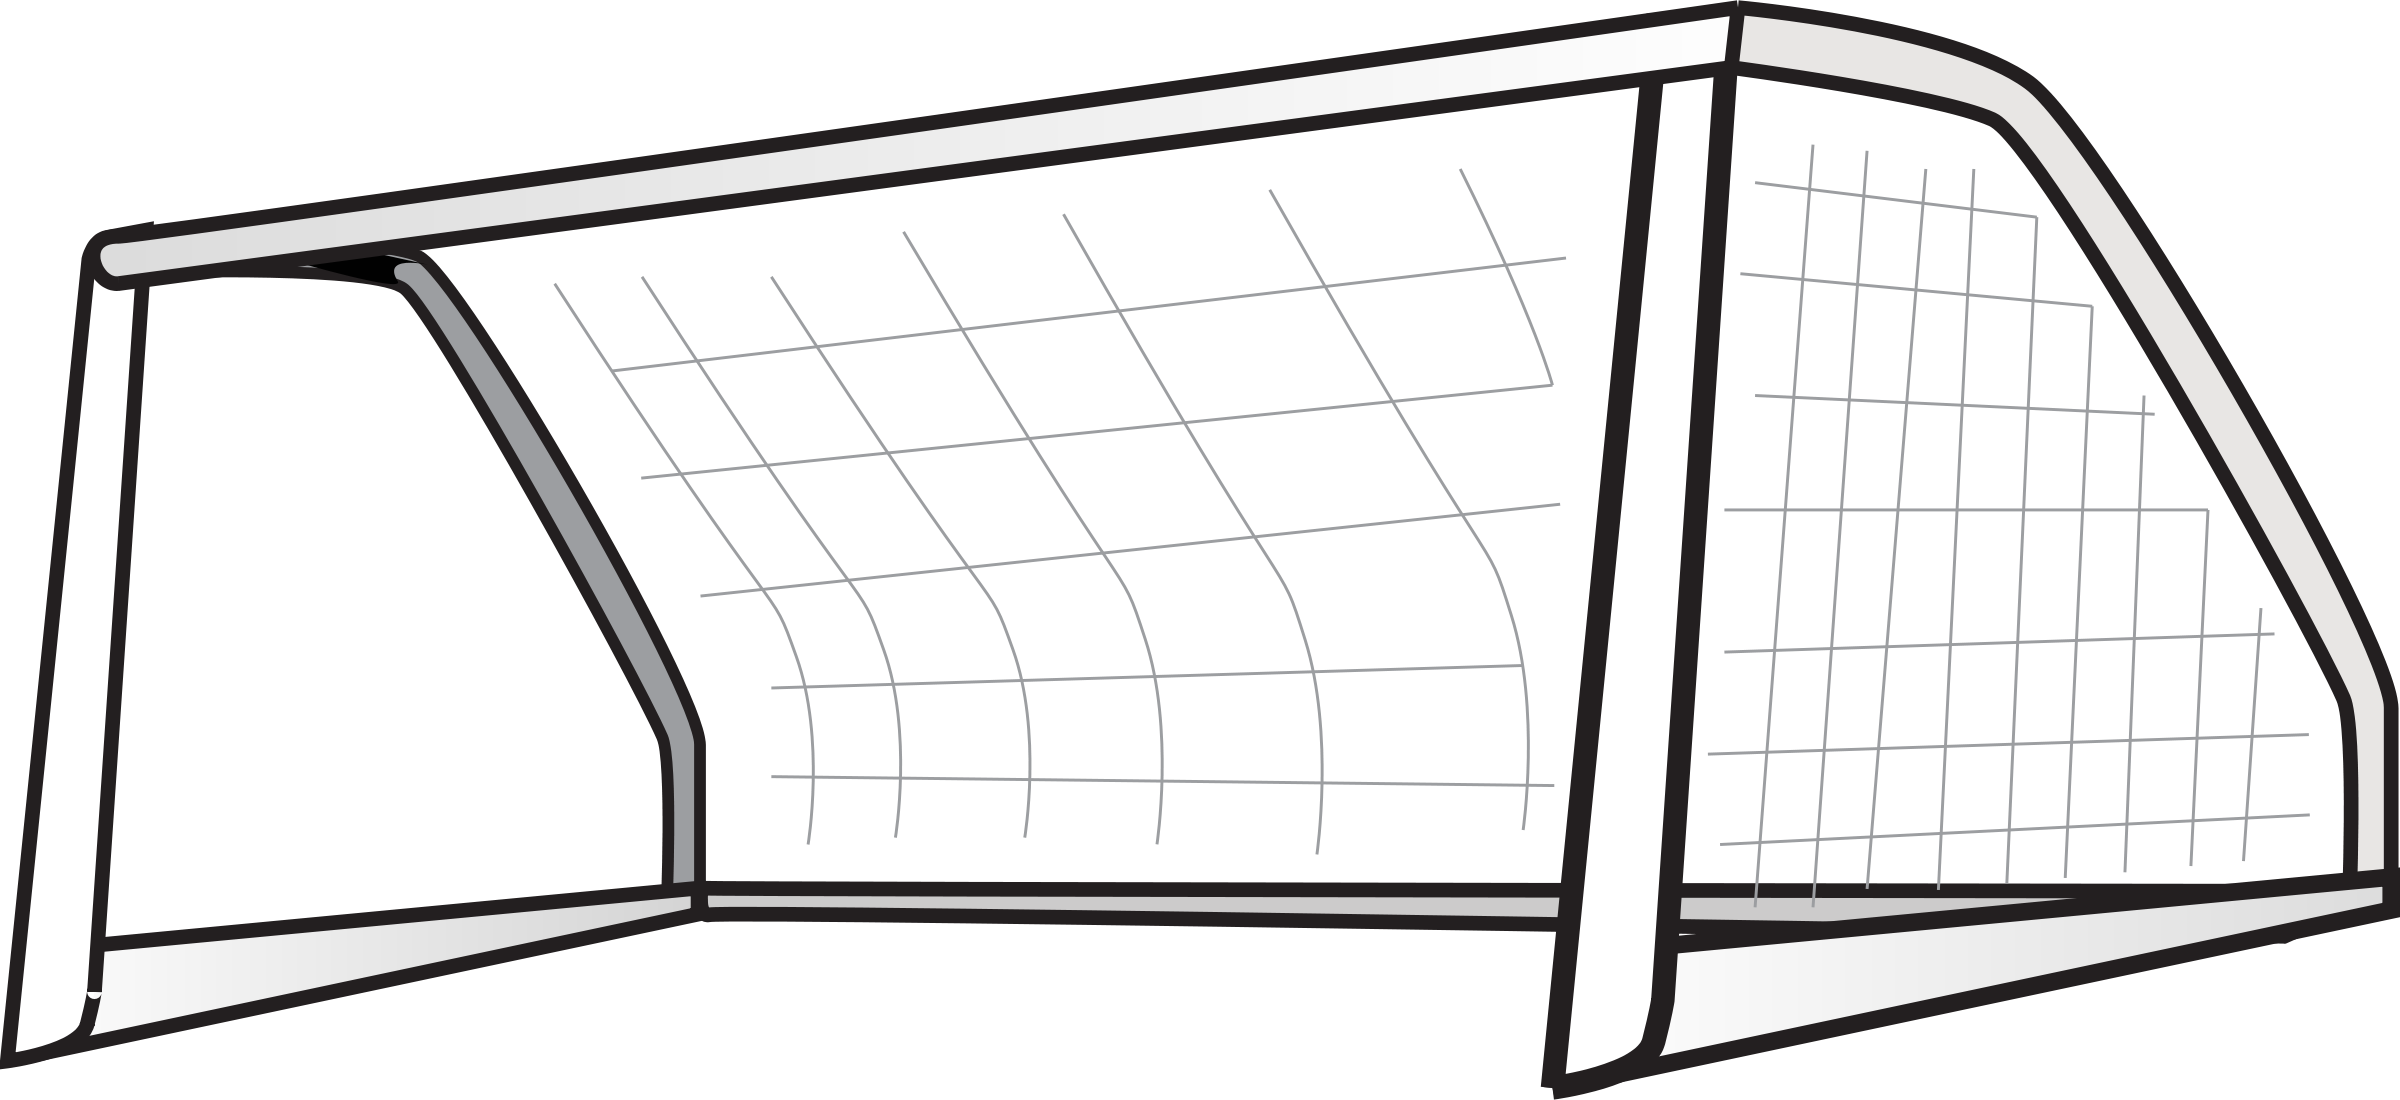 Free Soccer Goal Images, Download Free Clip Art, Free Clip